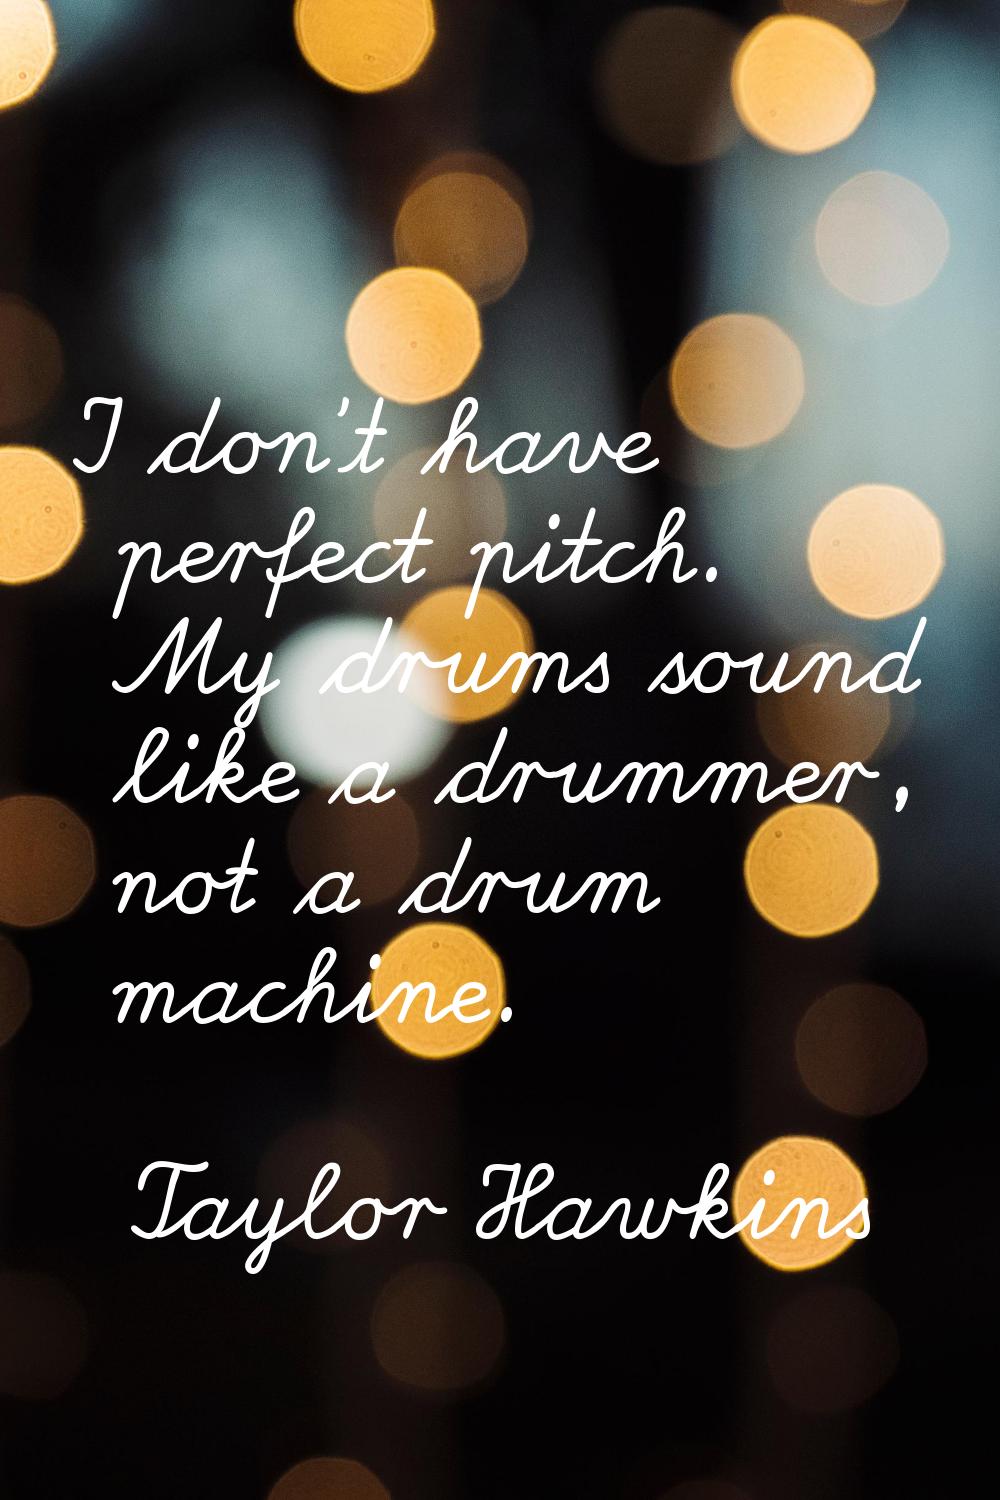 I don't have perfect pitch. My drums sound like a drummer, not a drum machine.